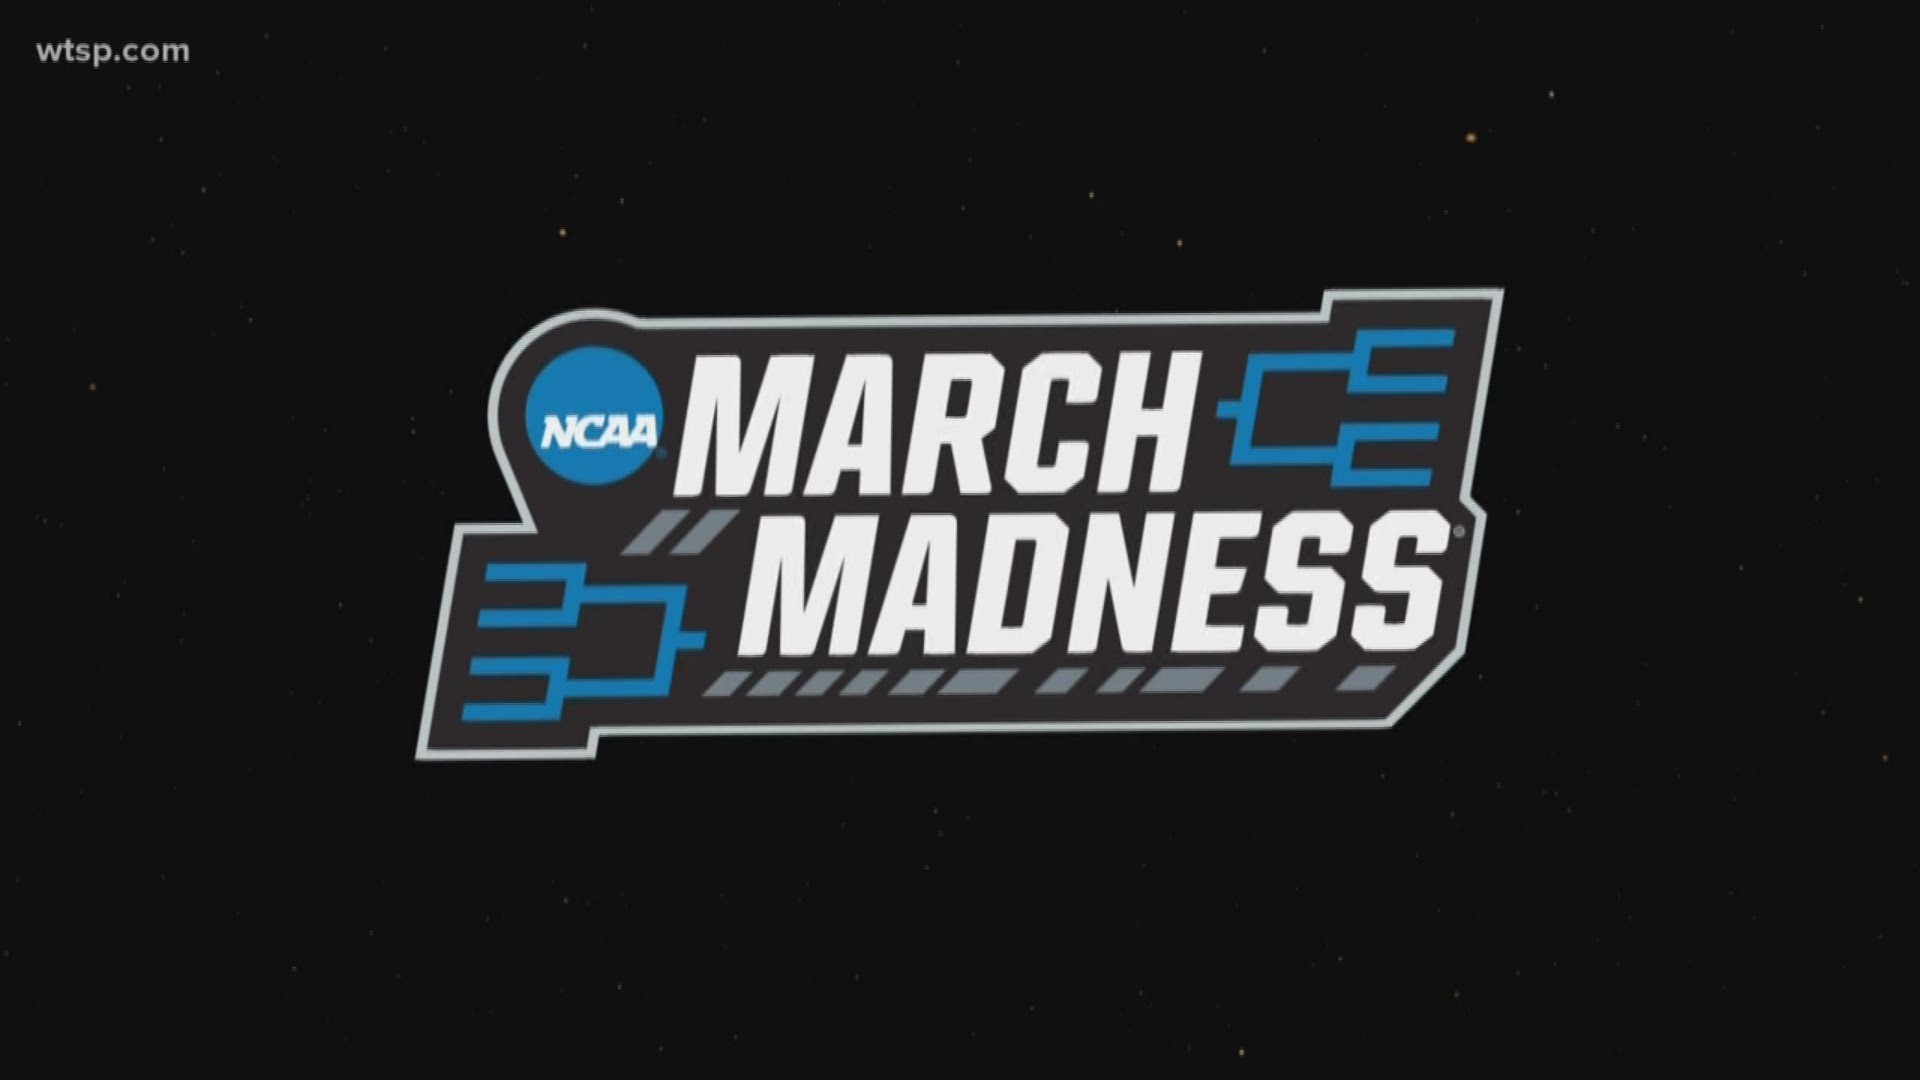 The NCAA Division I men's basketball tournament started in 1939. https://on.wtsp.com/2TZC7fU